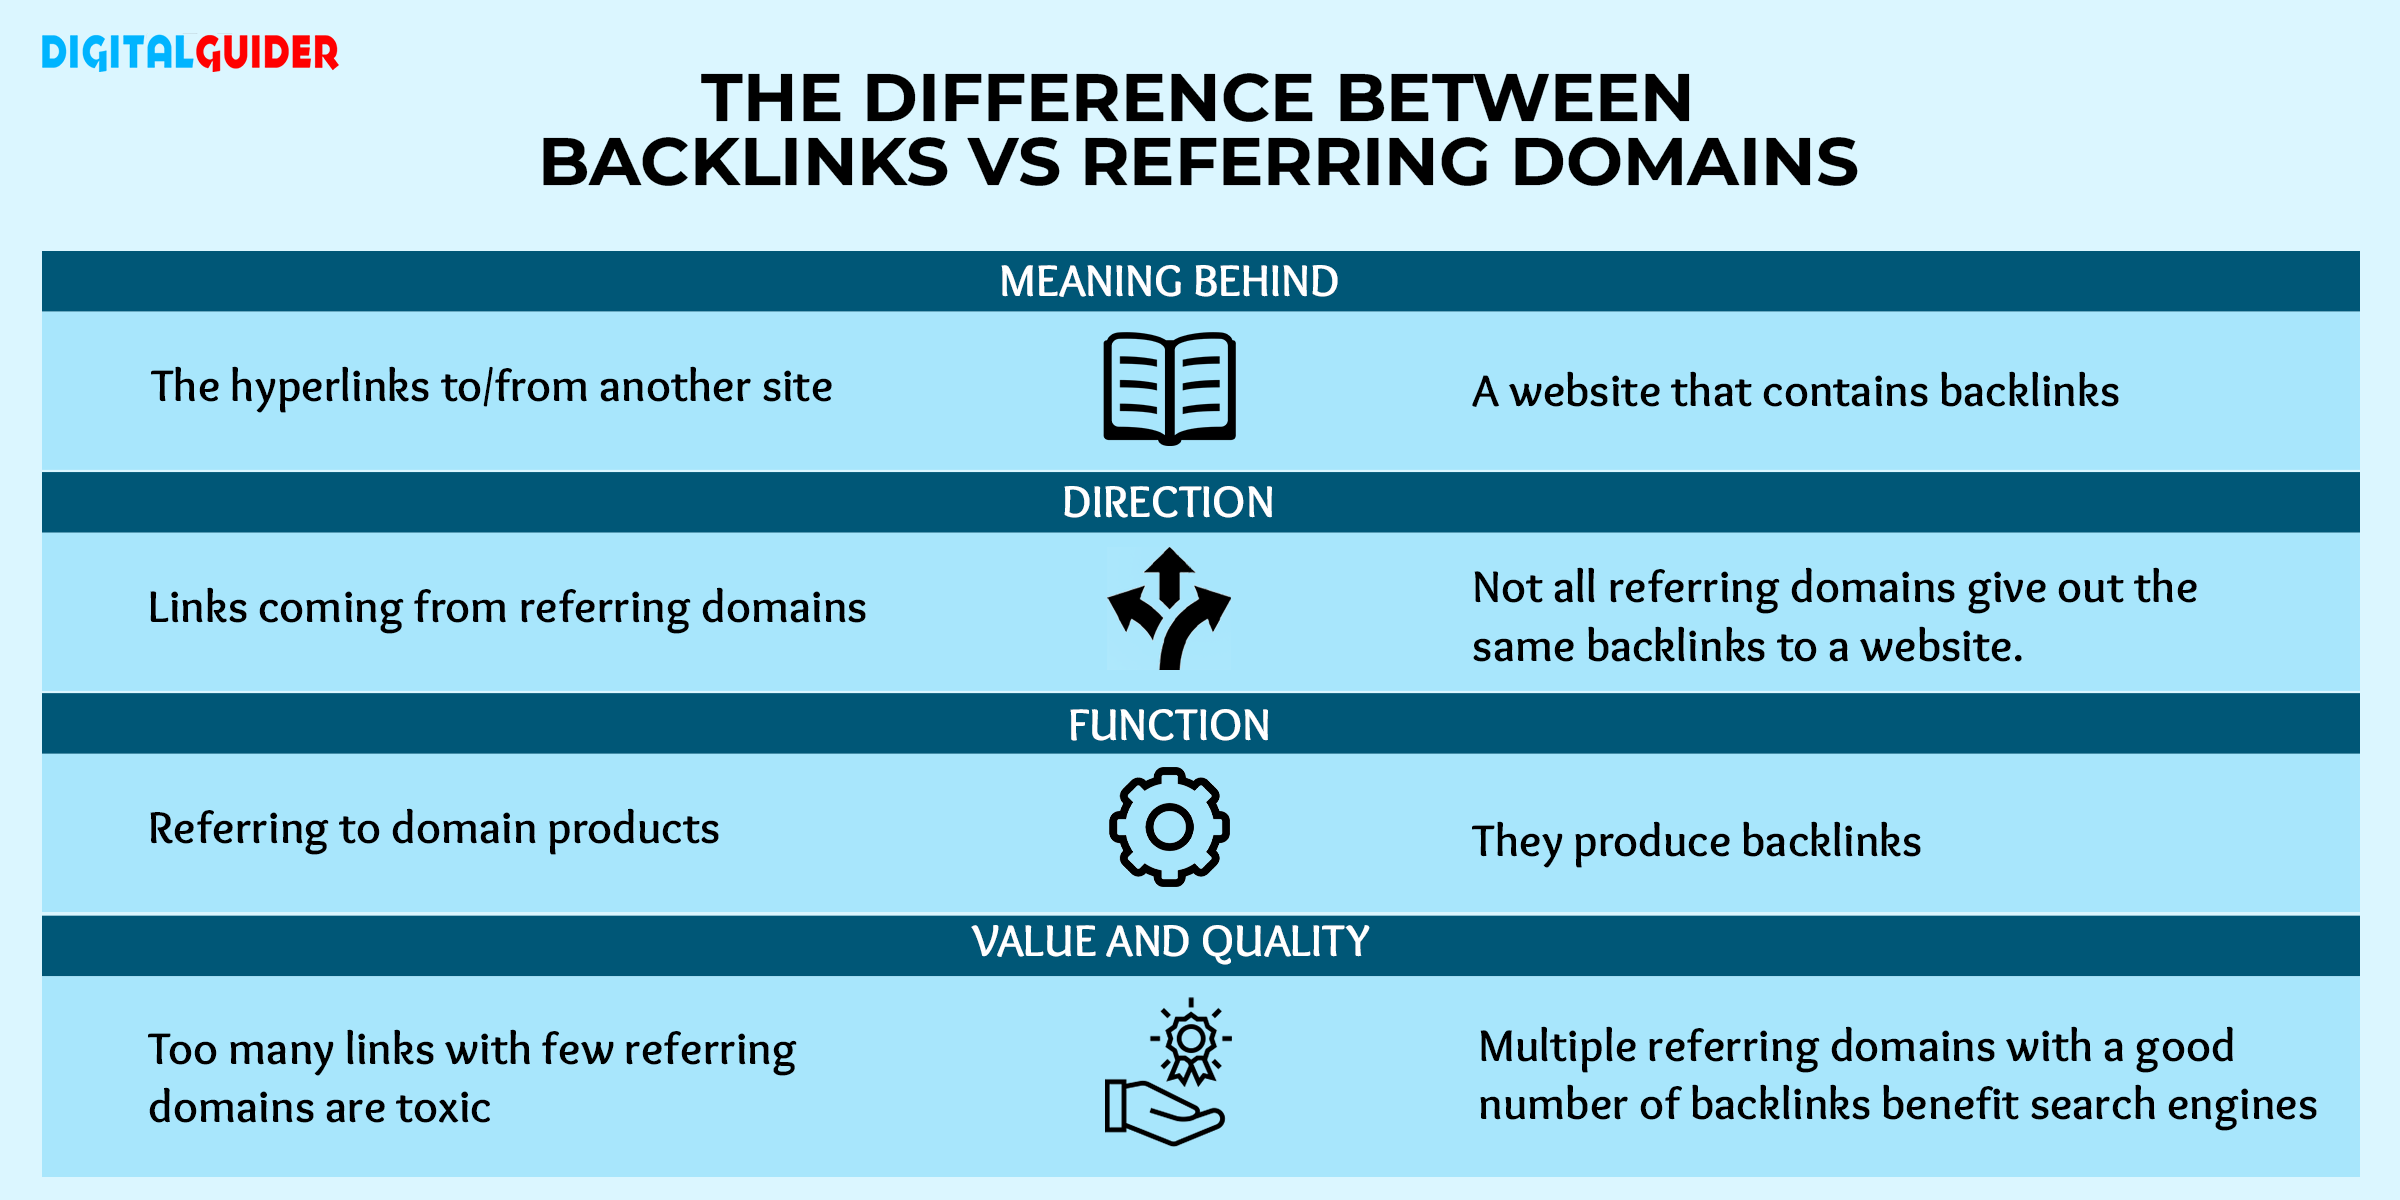 Major Difference Between Backlinks and Referring Domains